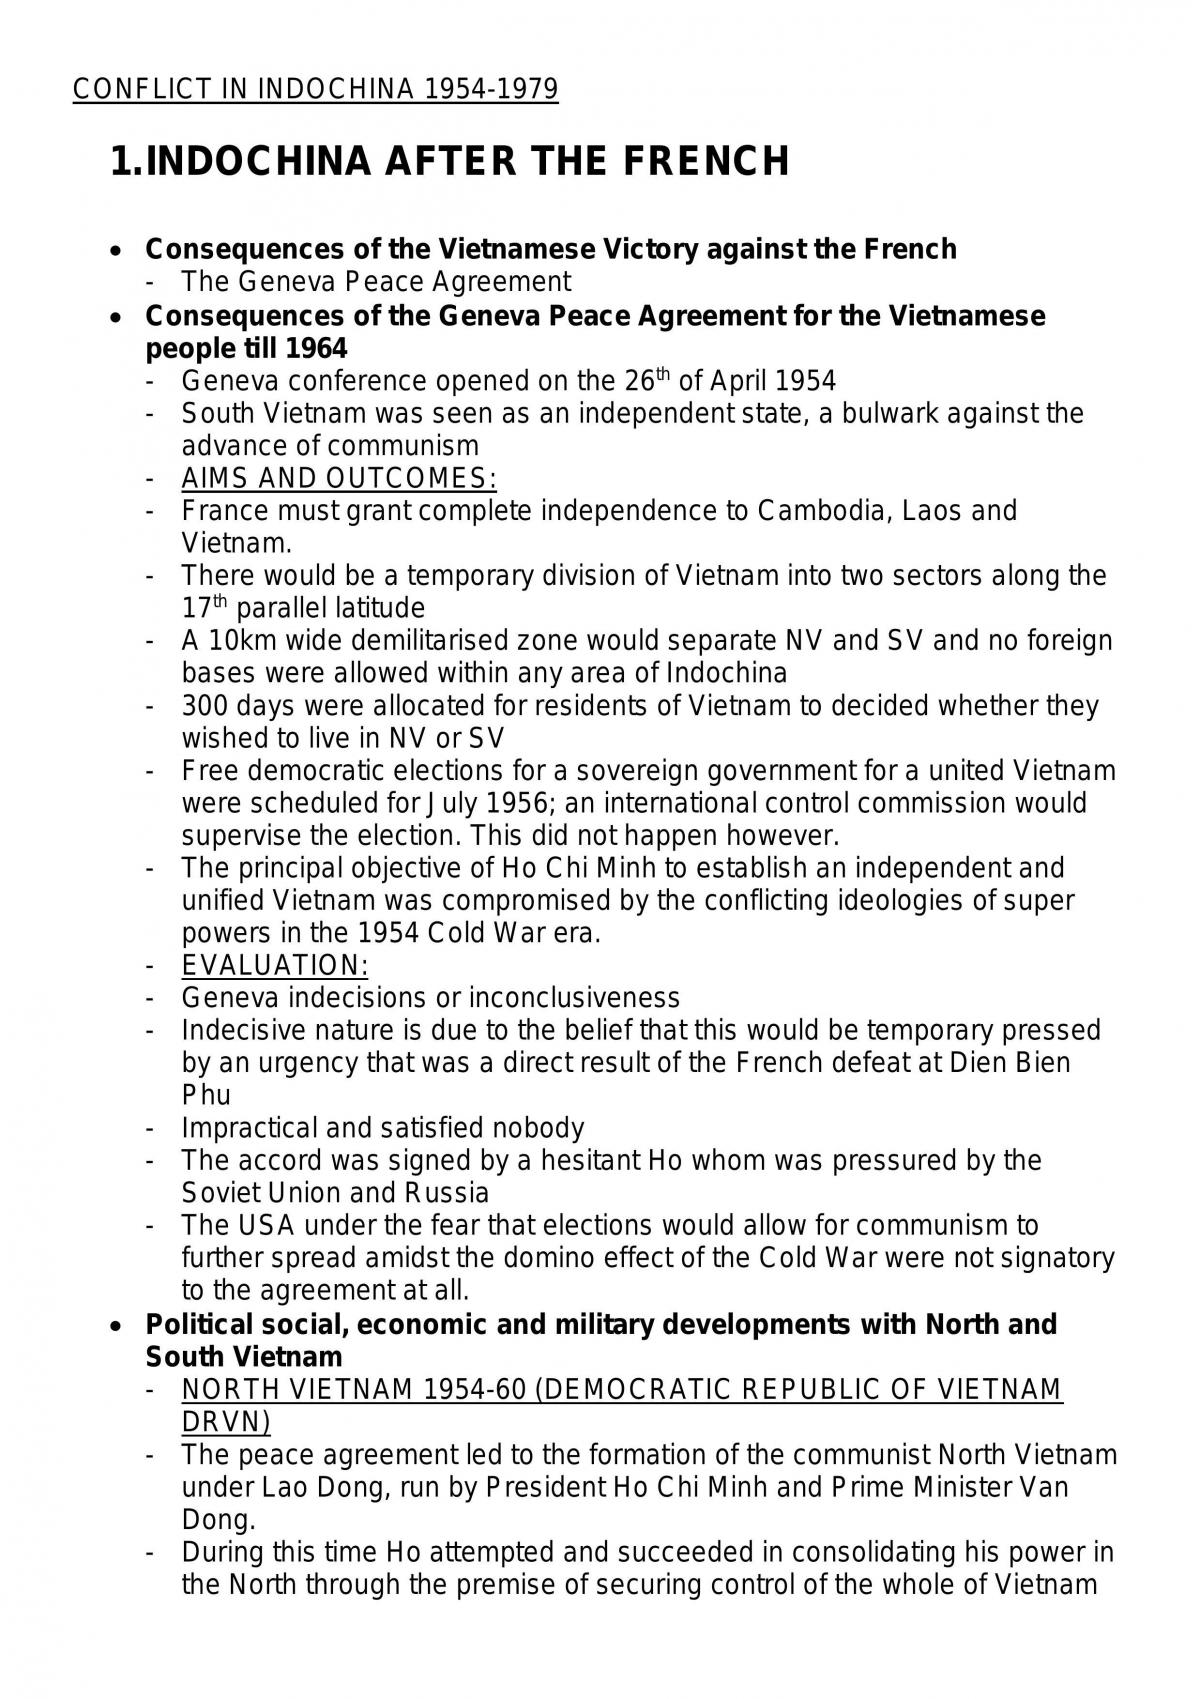 Modern History, Conflict in Indochina - Page 1